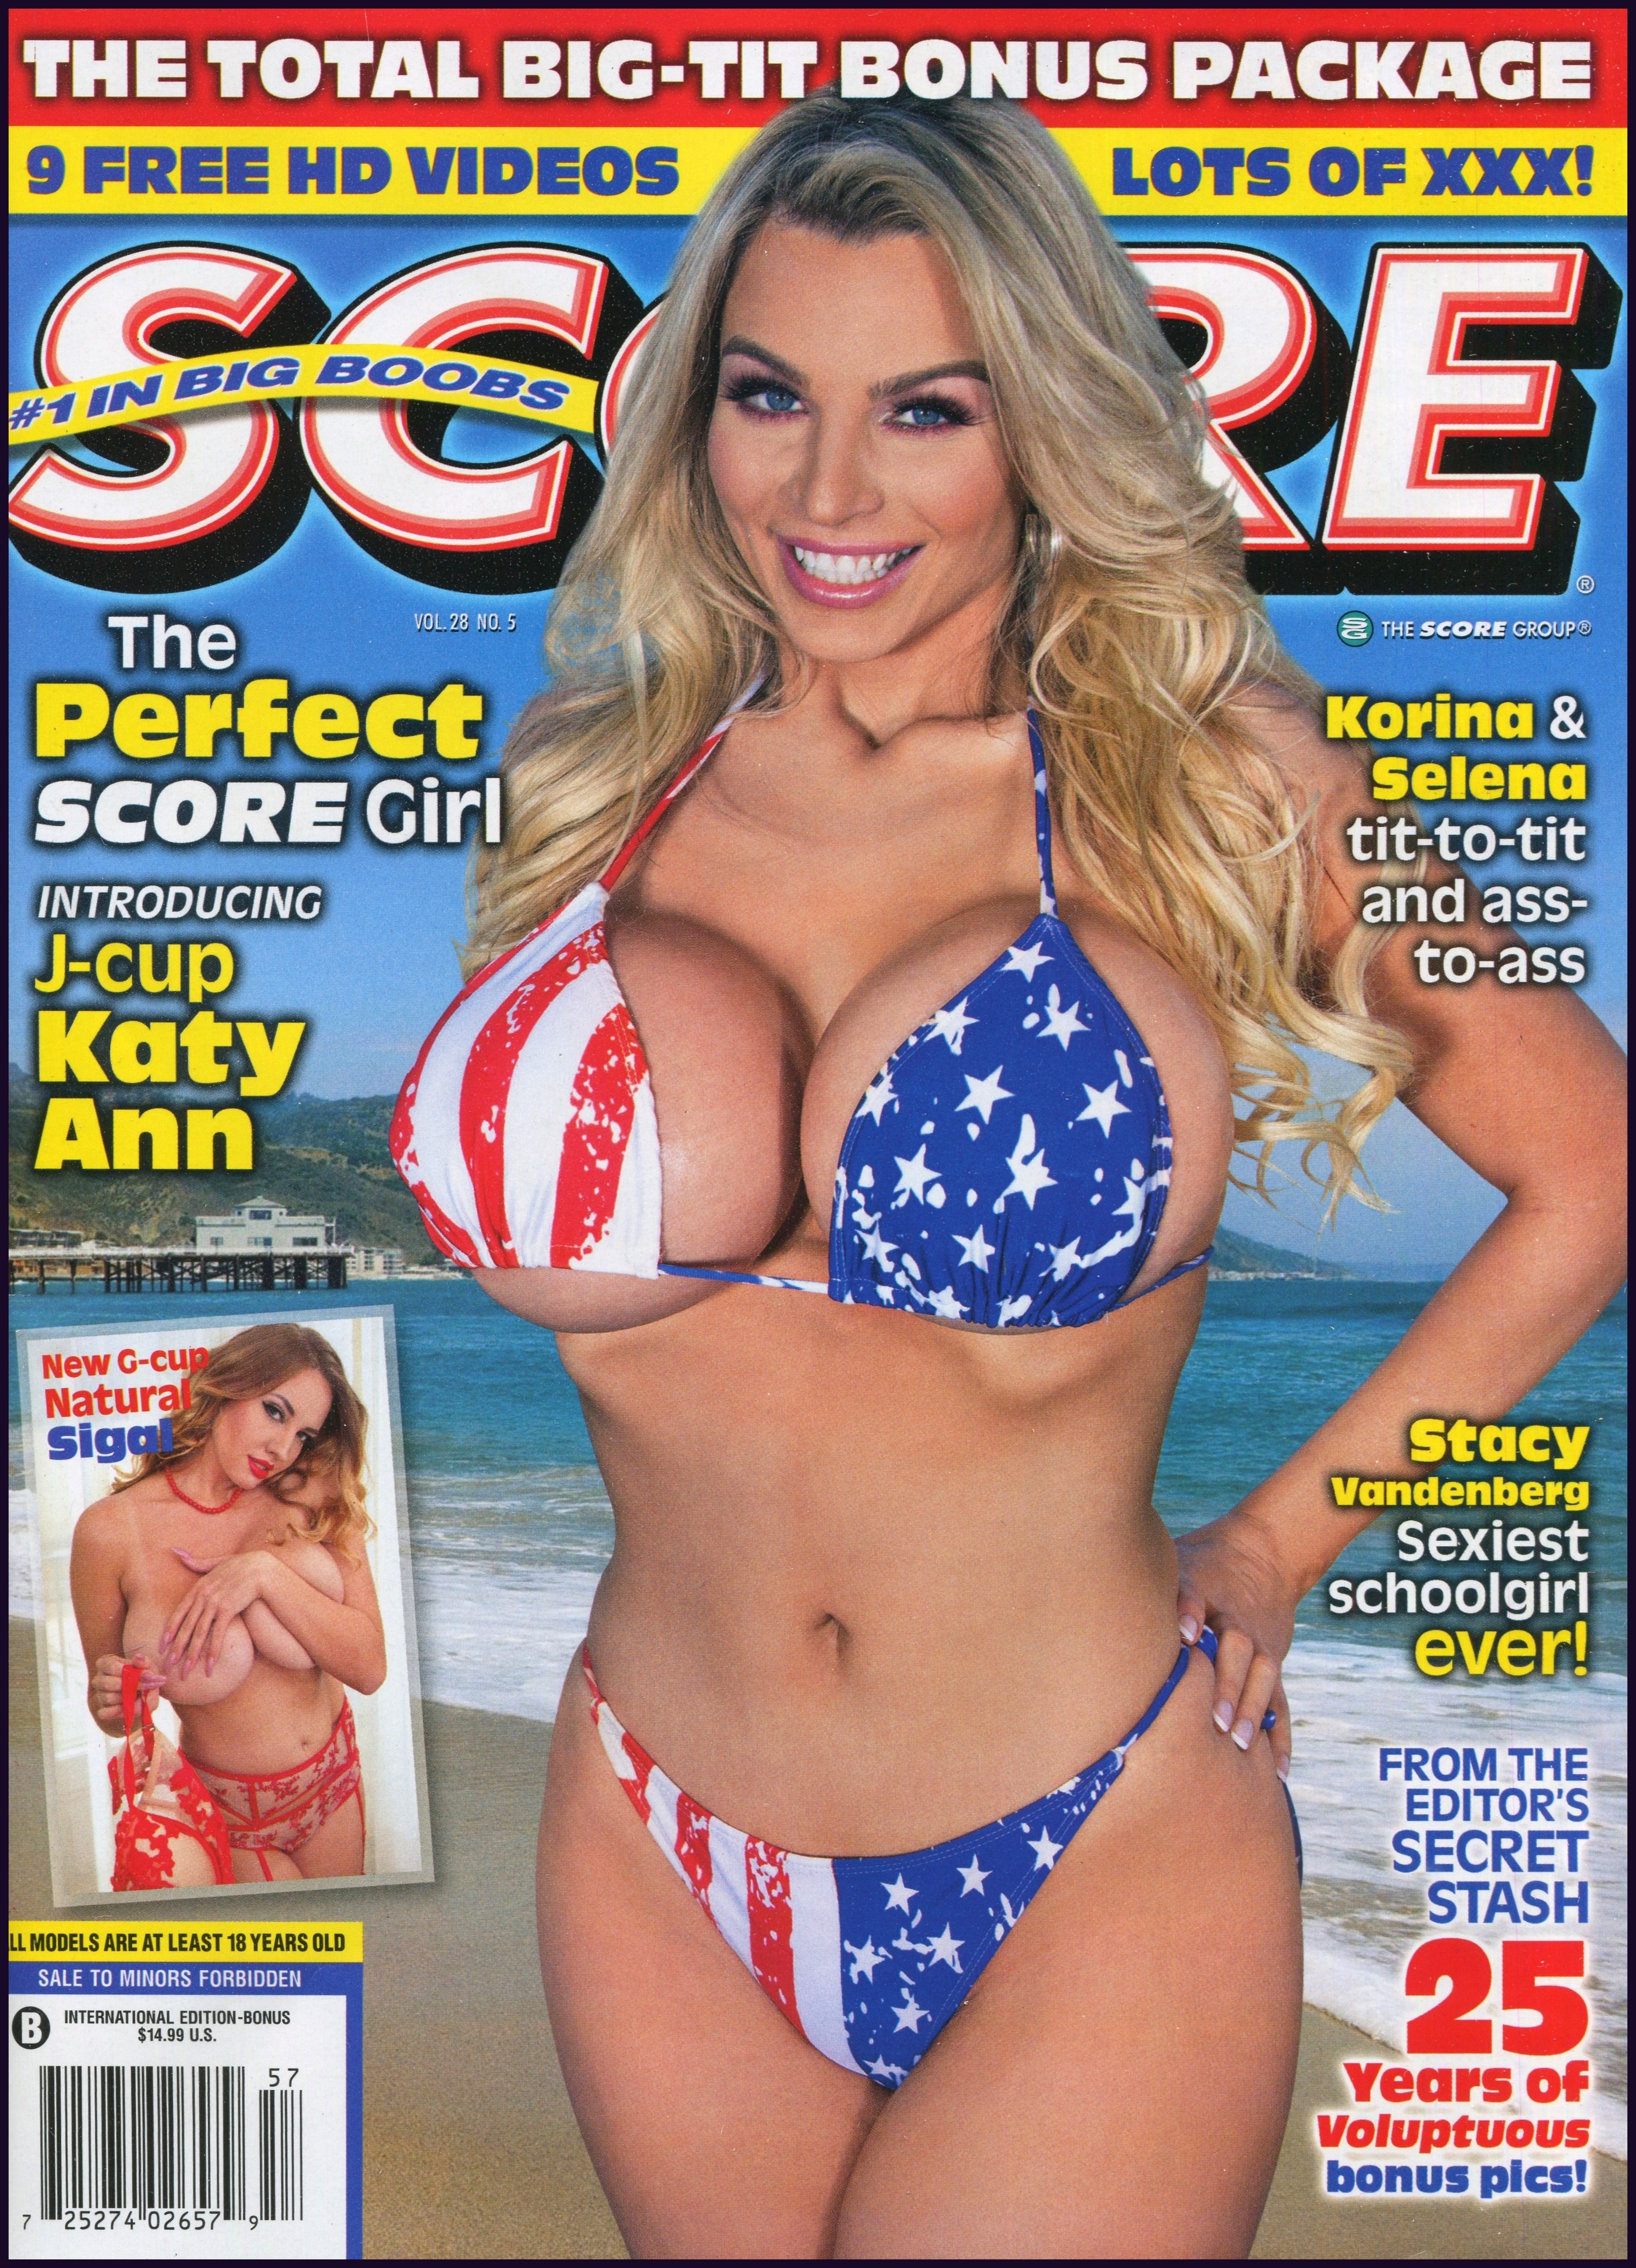 Score June 2019, Vol 28 # 5 magazine back issue Score magizine back copy Score June 2019, Vol 28 # 5 Magazine Back Issue Published by Score Publishing Group, Specializing in Large Breasted Voluptuous Women. 